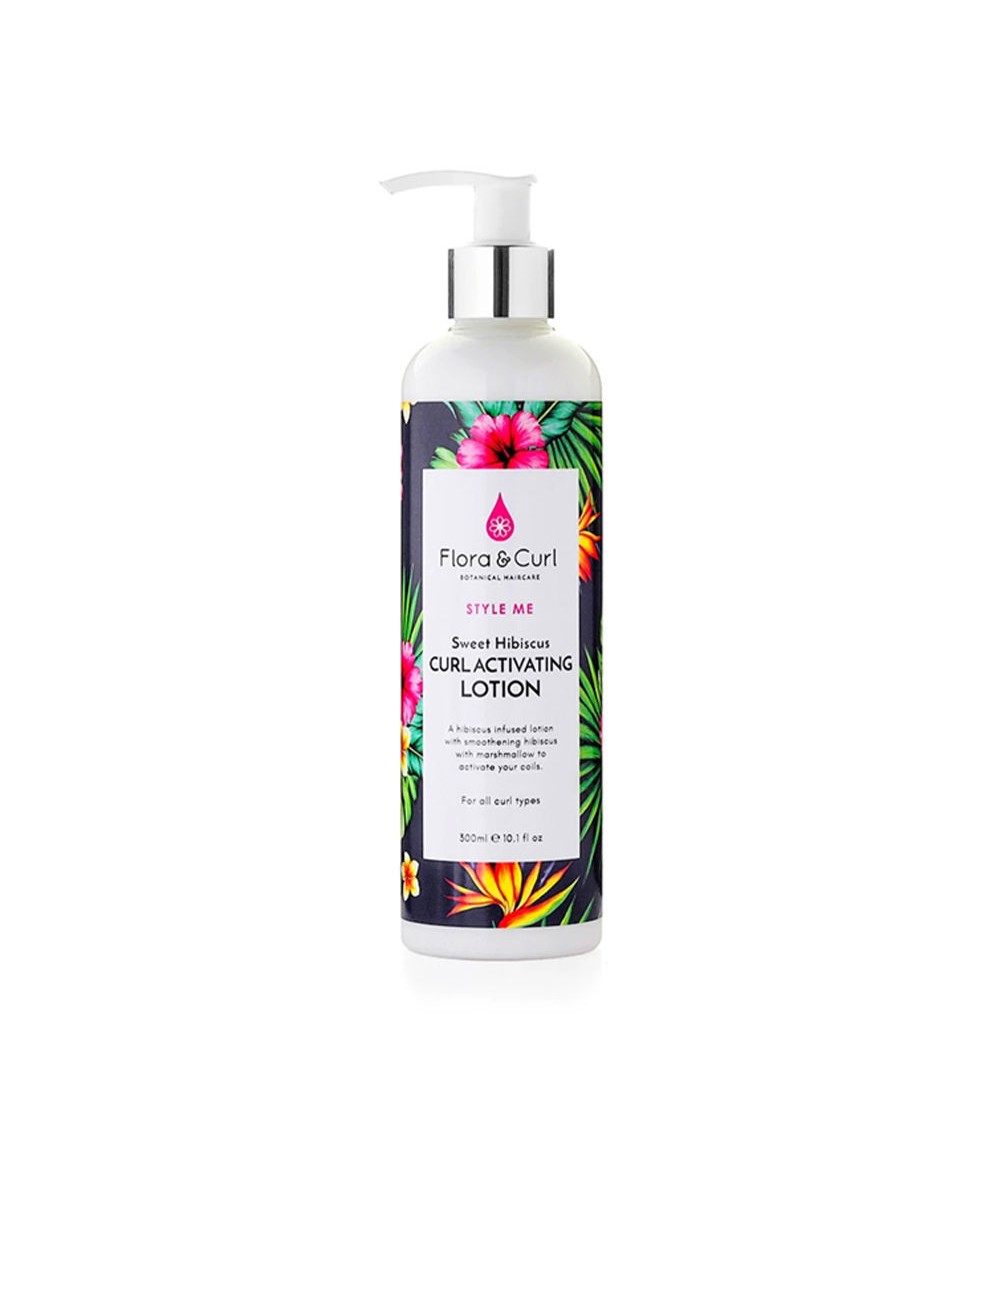 STYLE ME sweet hibiscus curl activating lotion 300 ml